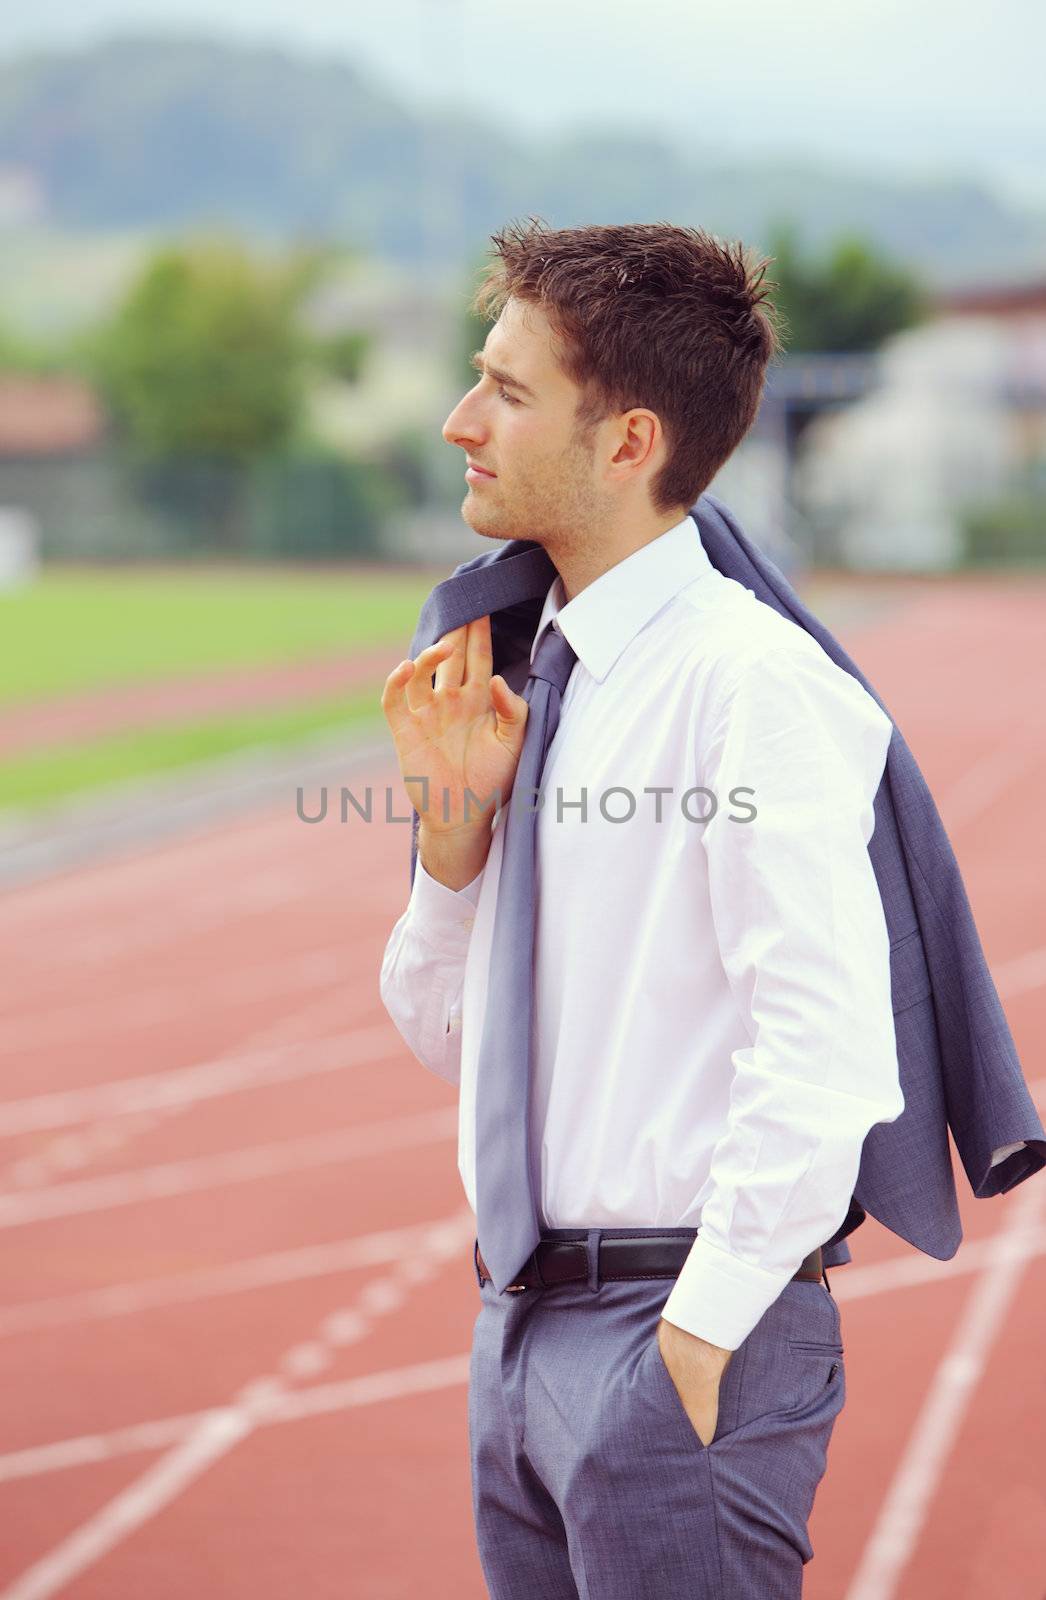 Football coach wearing a man's suit watching the match